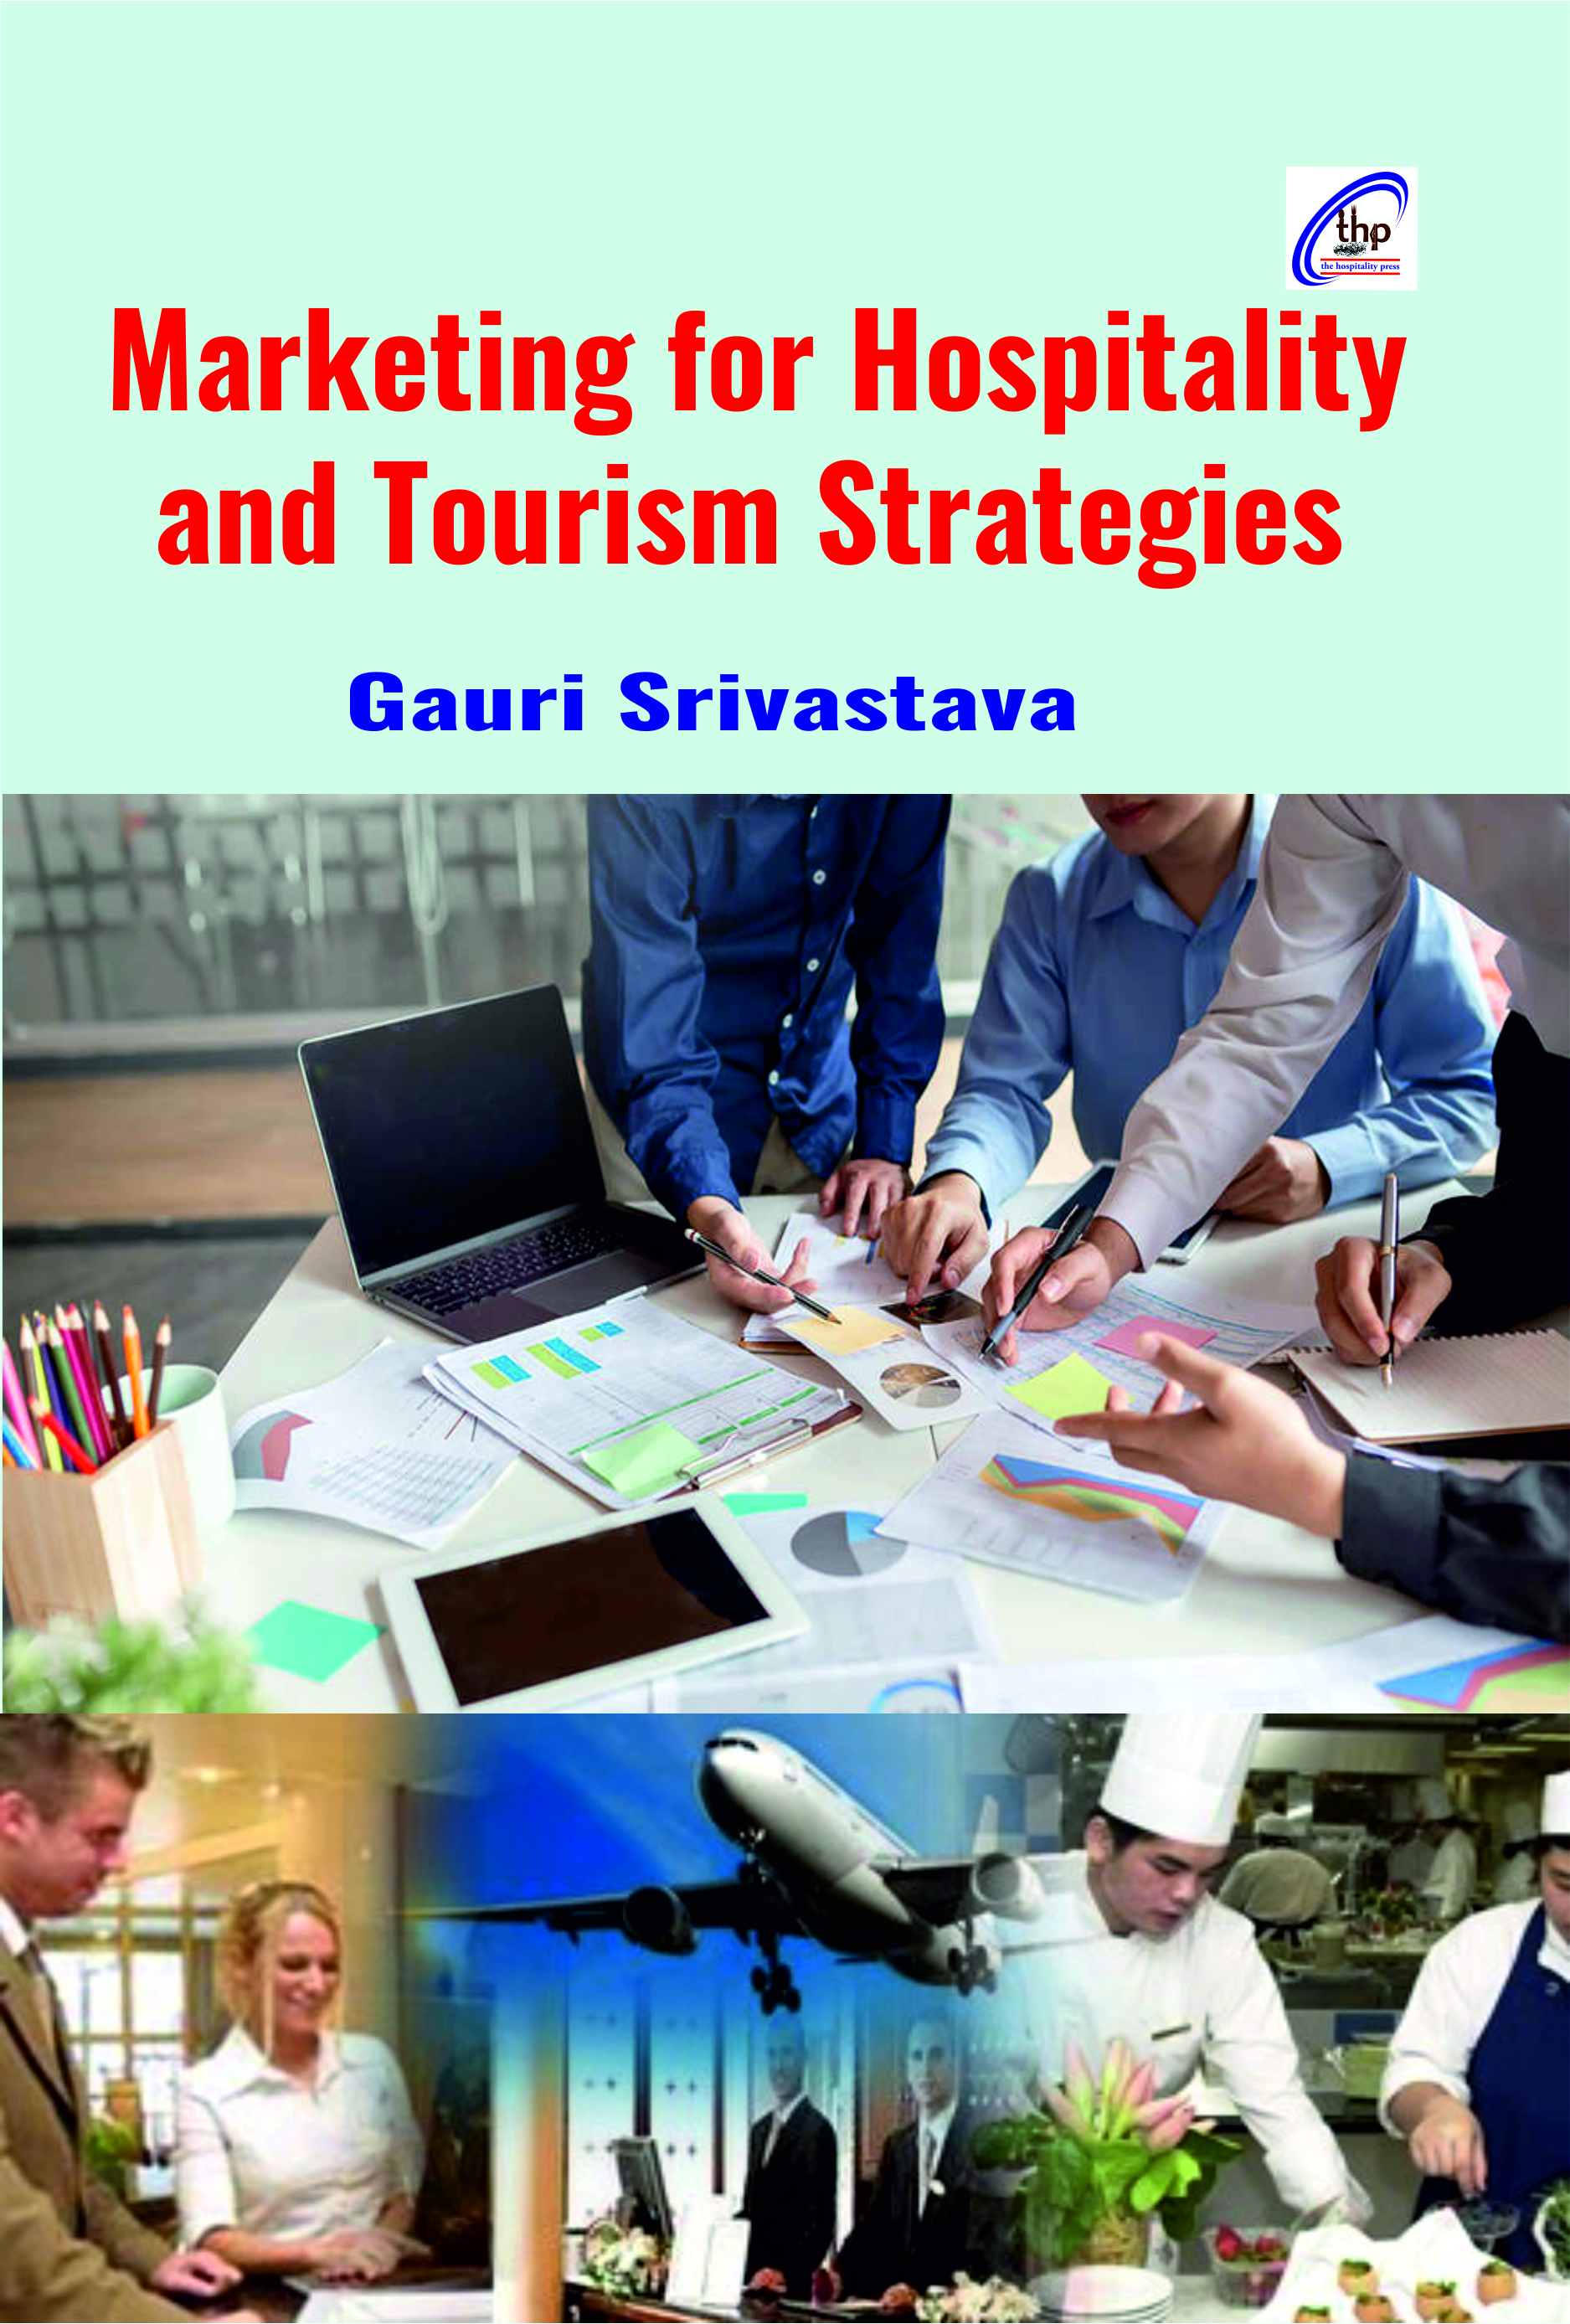 Marketing for Hospitality and Tourism Strategies